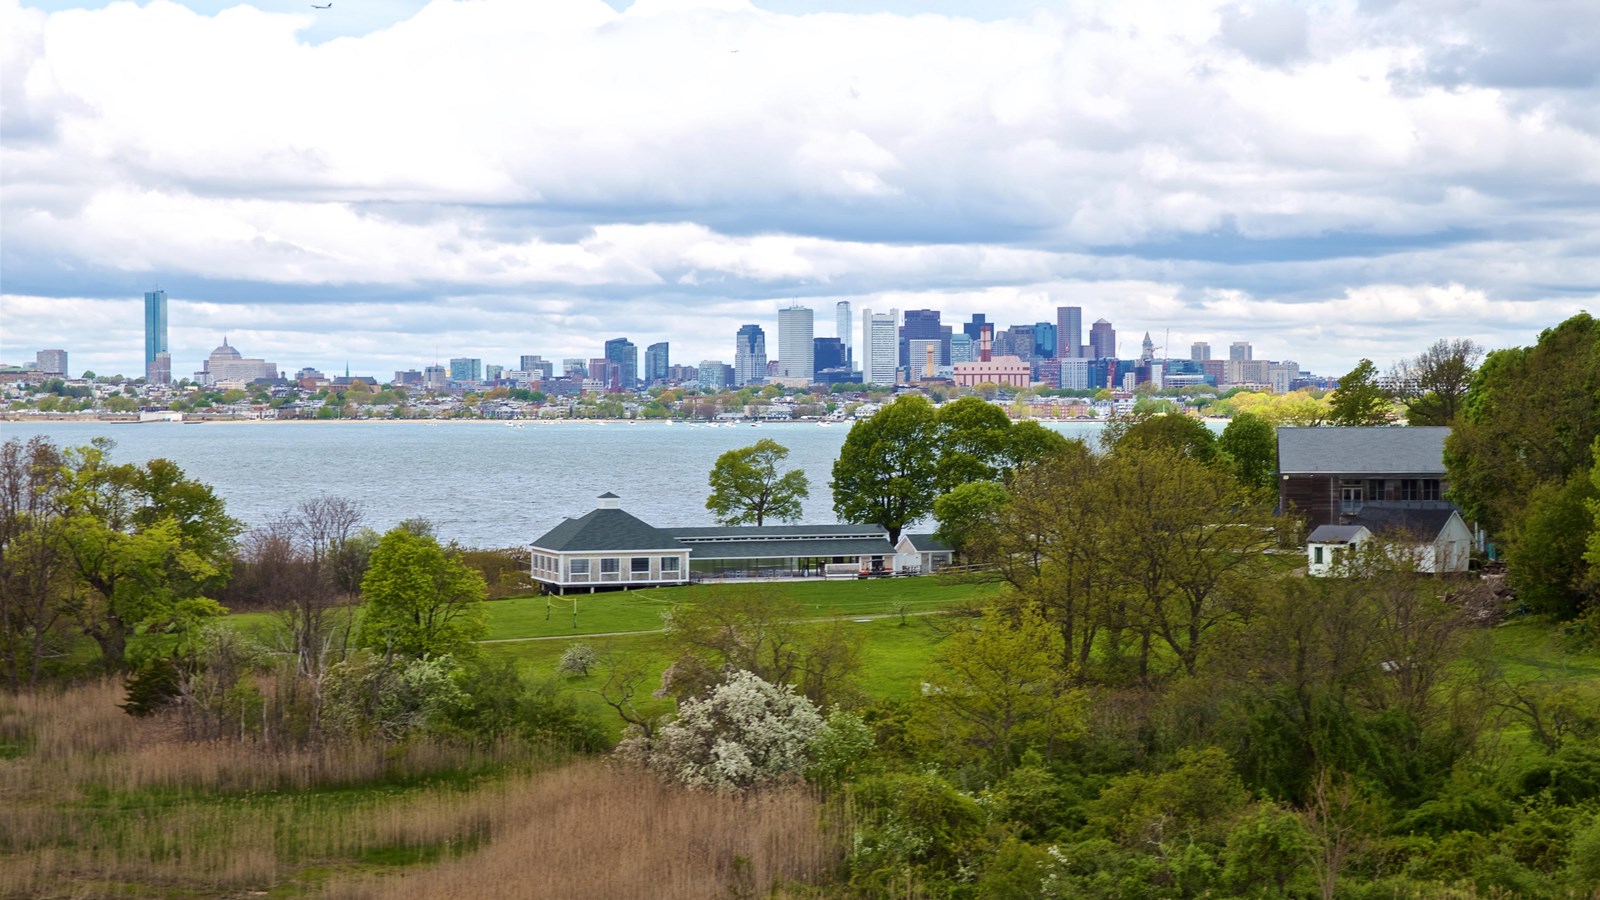 Thompson Island, with green grass field with buildings in the foreground and Boston city line behind